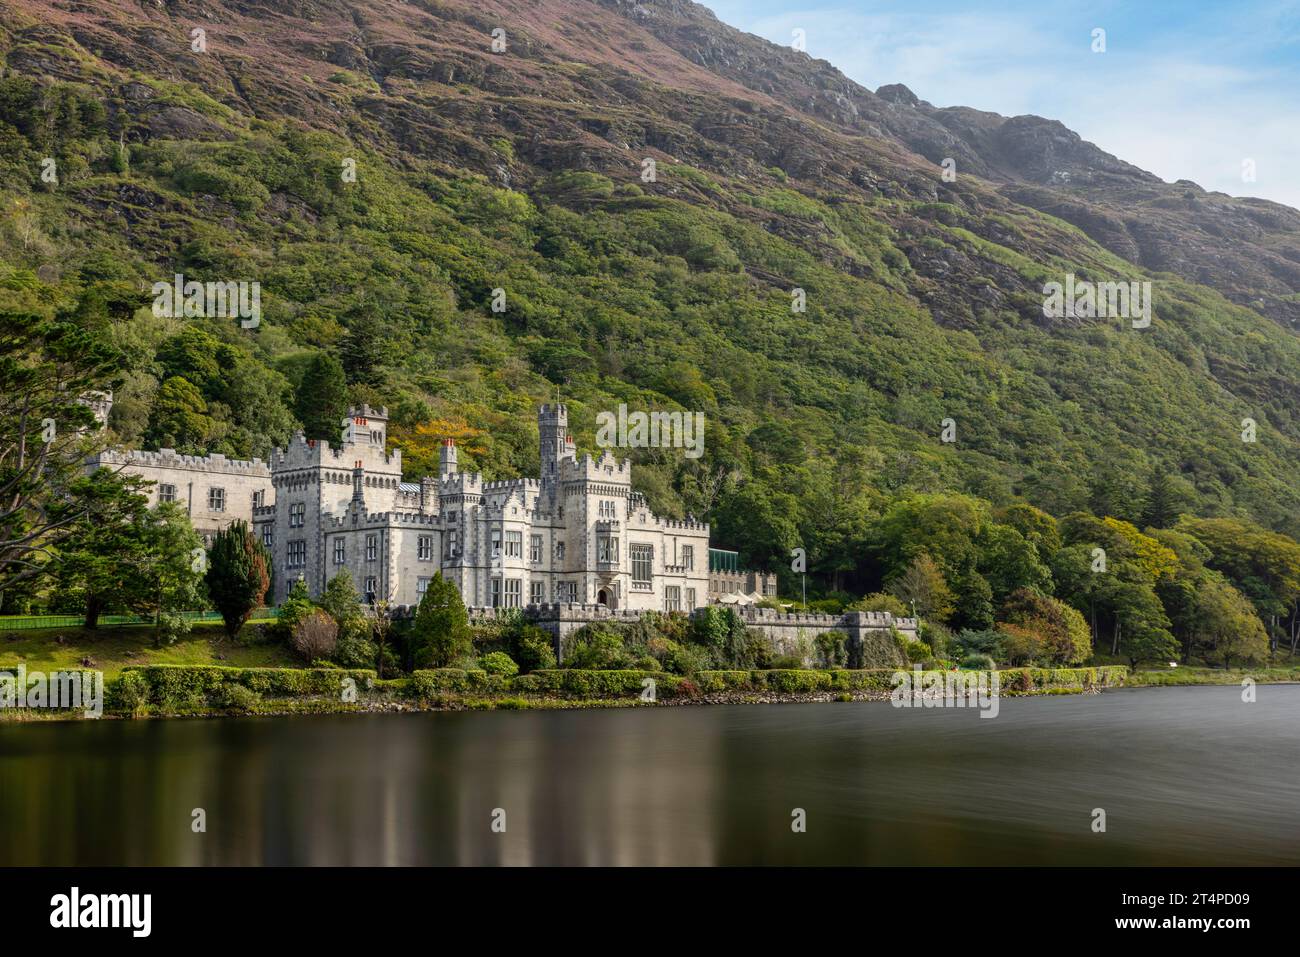 Kylemore Abbey is a 19th-century Benedictine monastery with Gothic Revival architecture and Victorian walled gardens in Connemara, Ireland. Stock Photo